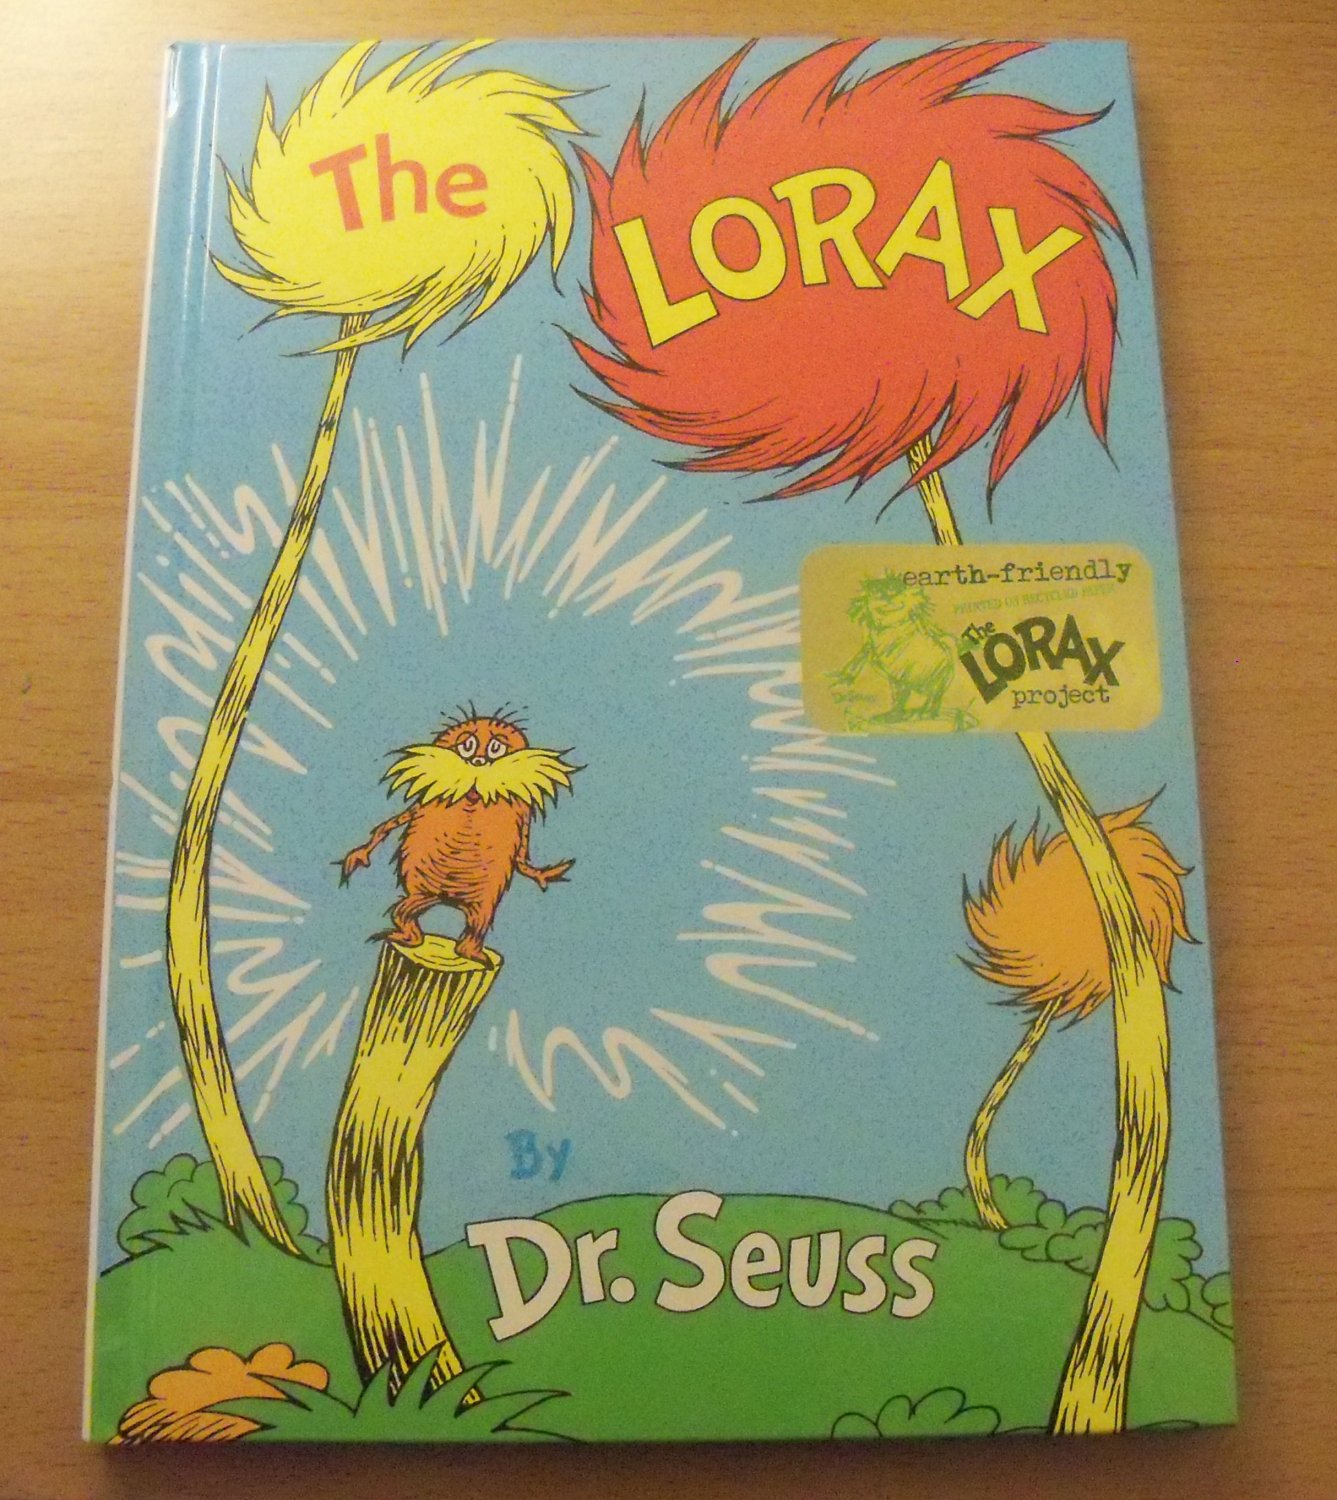 The Lorax by Dr. Seuss (1971, Hardcover)